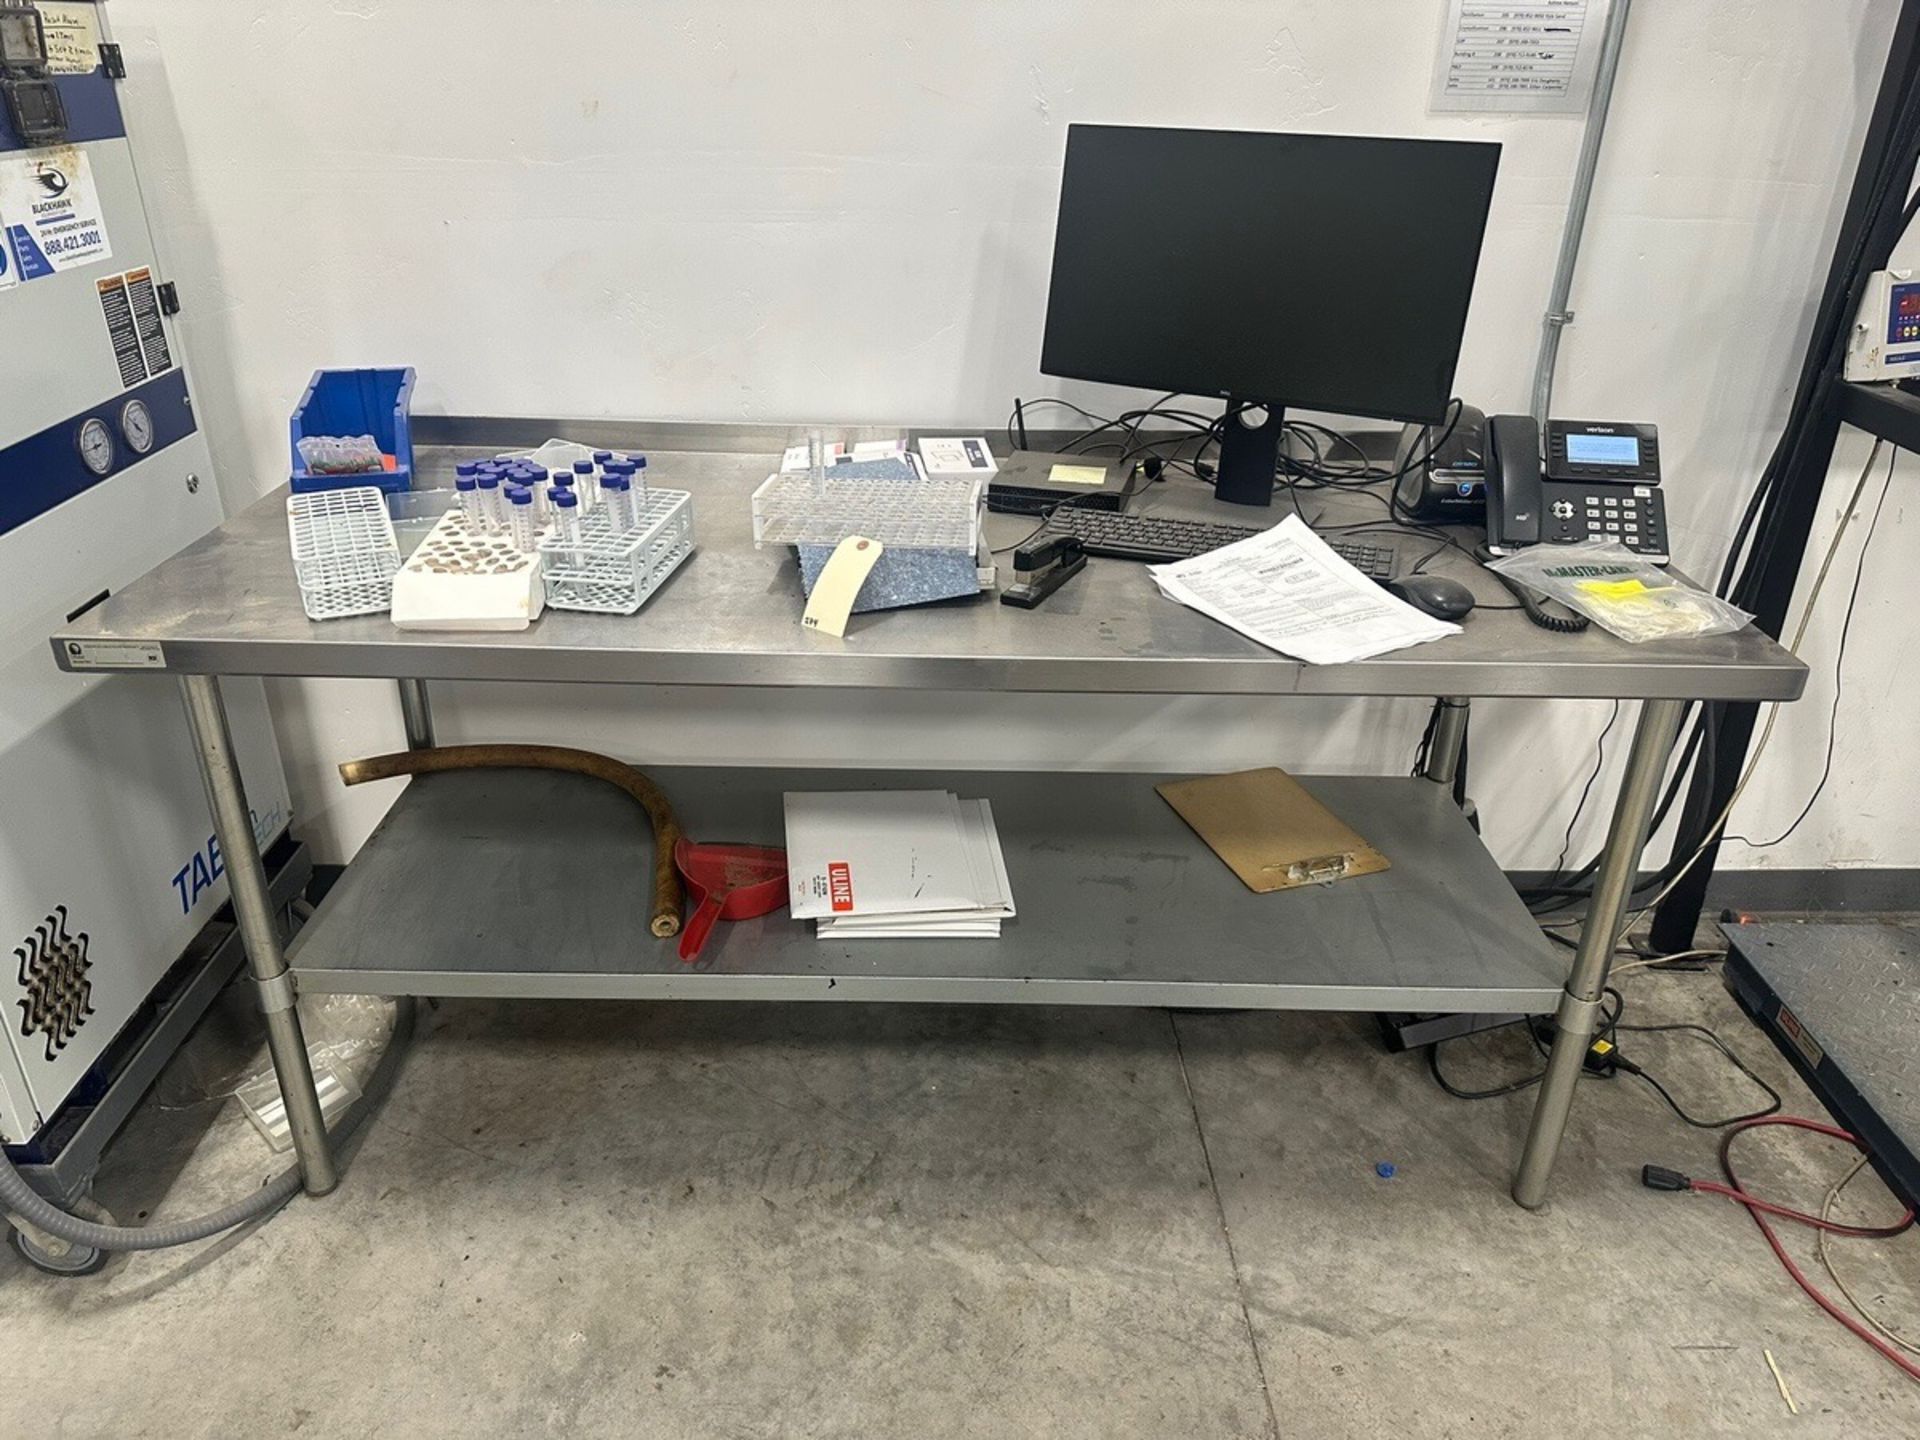 Stainless Steel Table With Work Station Contents | Rig Fee $35